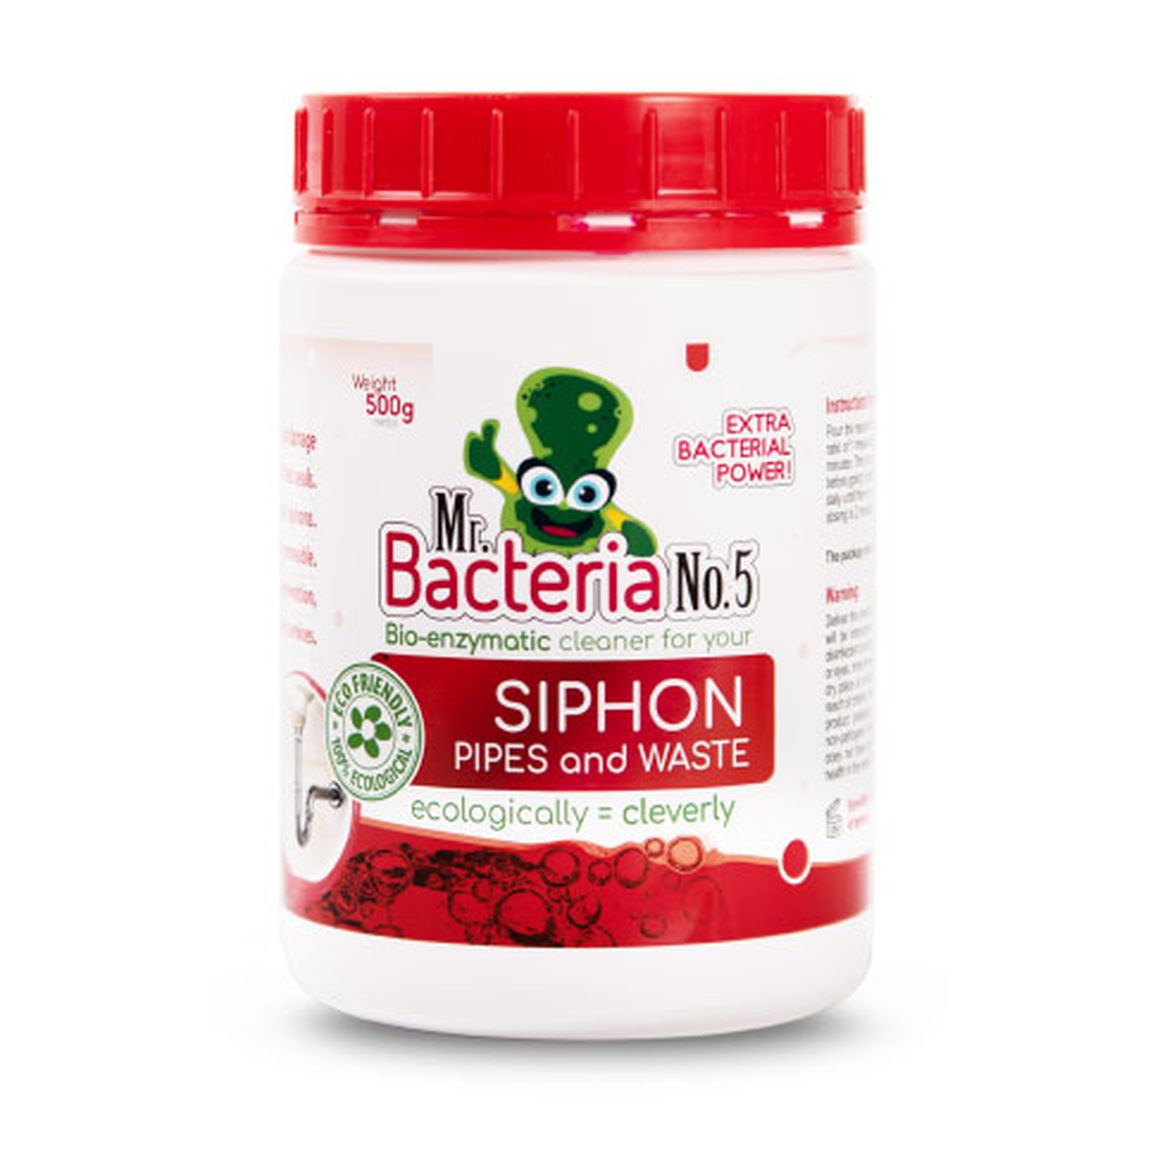 Mr. Bacteria No.5 Bio-enzymatic cleaner for your